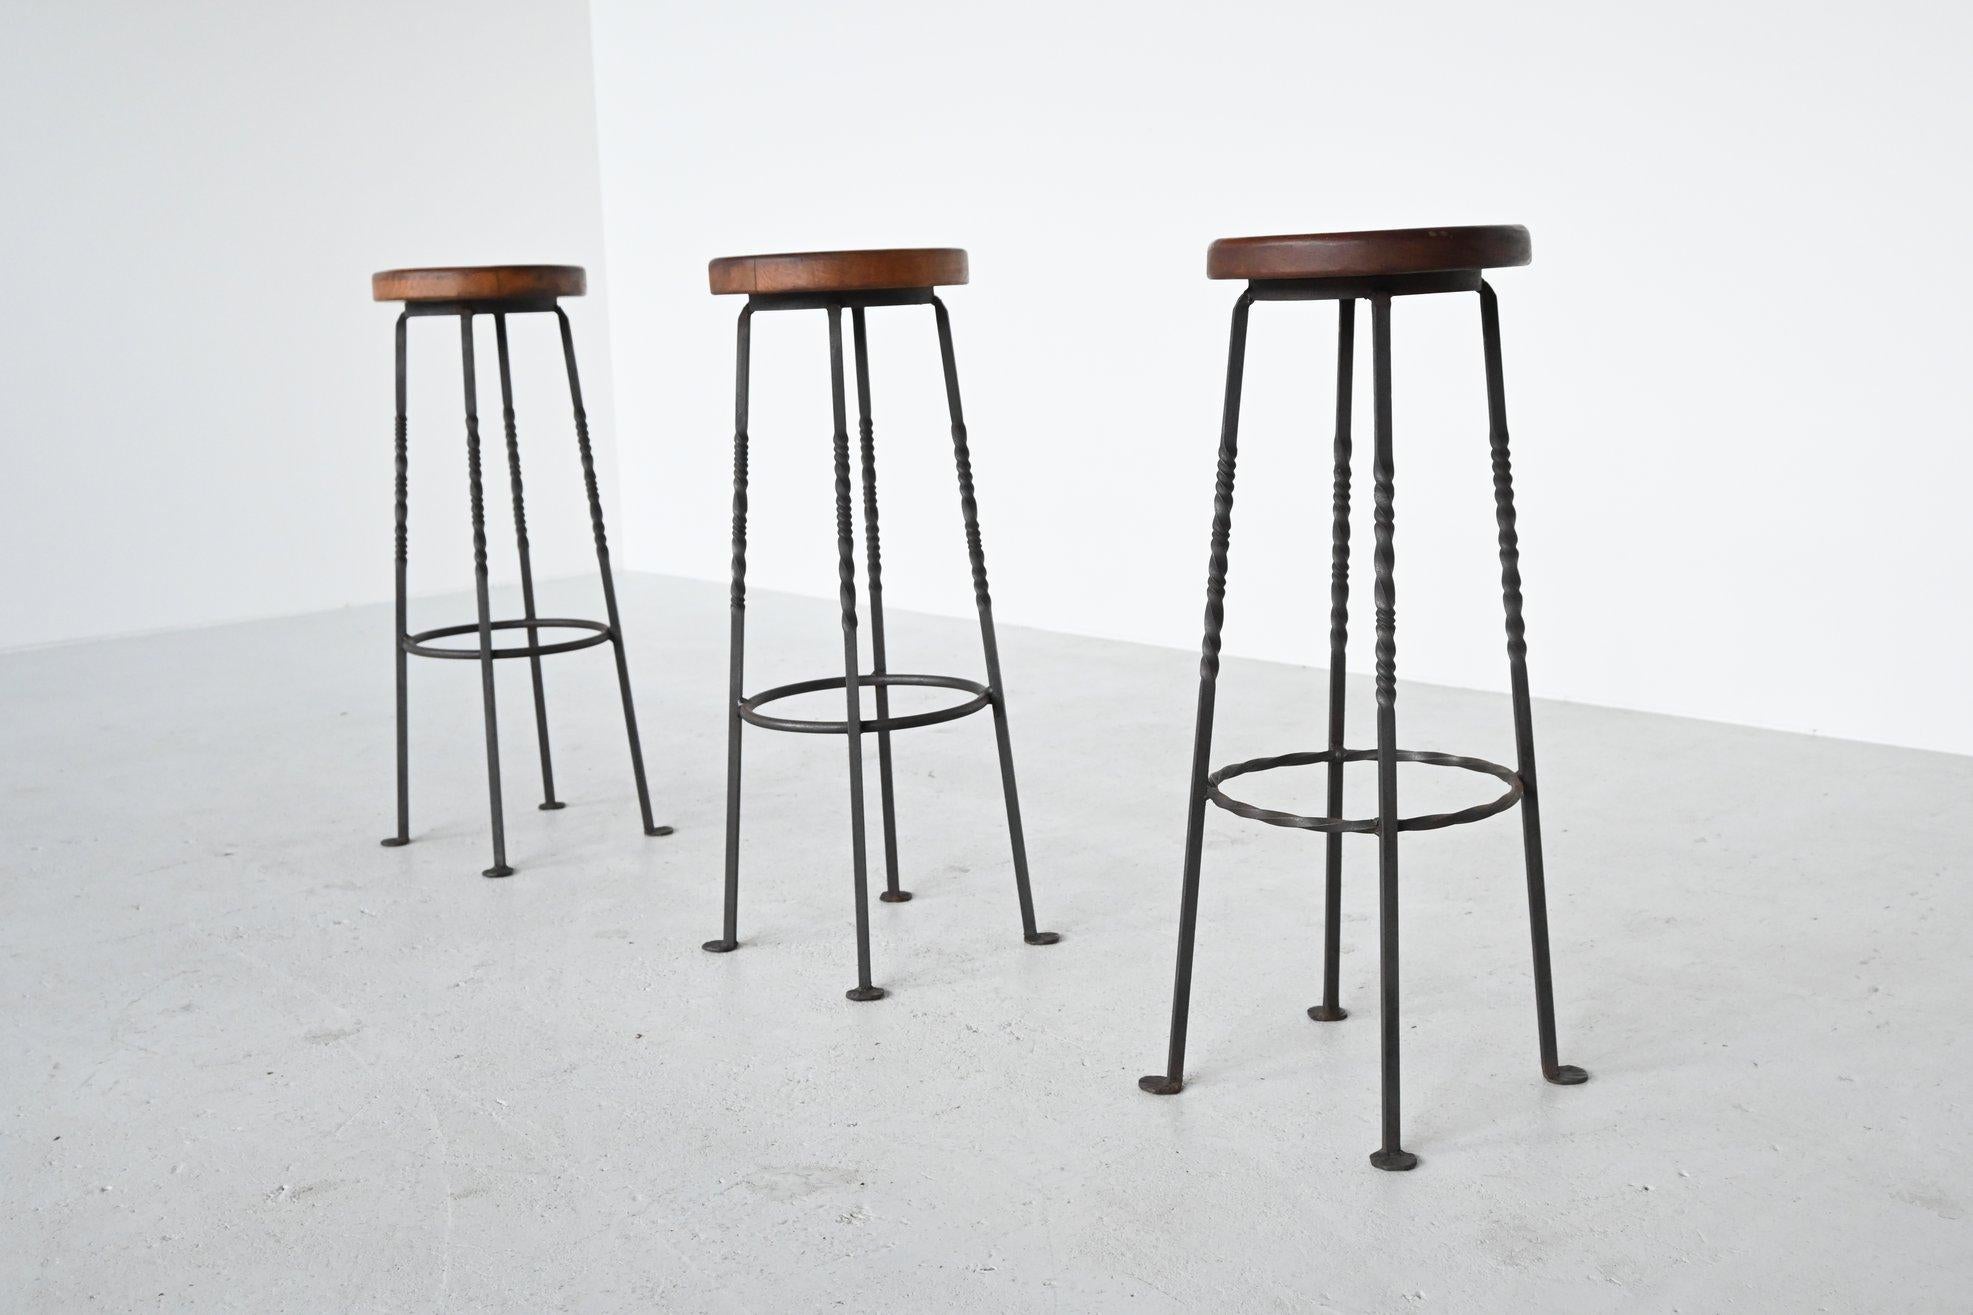 Very nice set of 3 French iron bar stools by unknown designer and manufacturer, France 1960. These stools have a wrought iron frame and an ash wooden seat. A nice detail are the flattened feet. The stools are in good original condition and have a